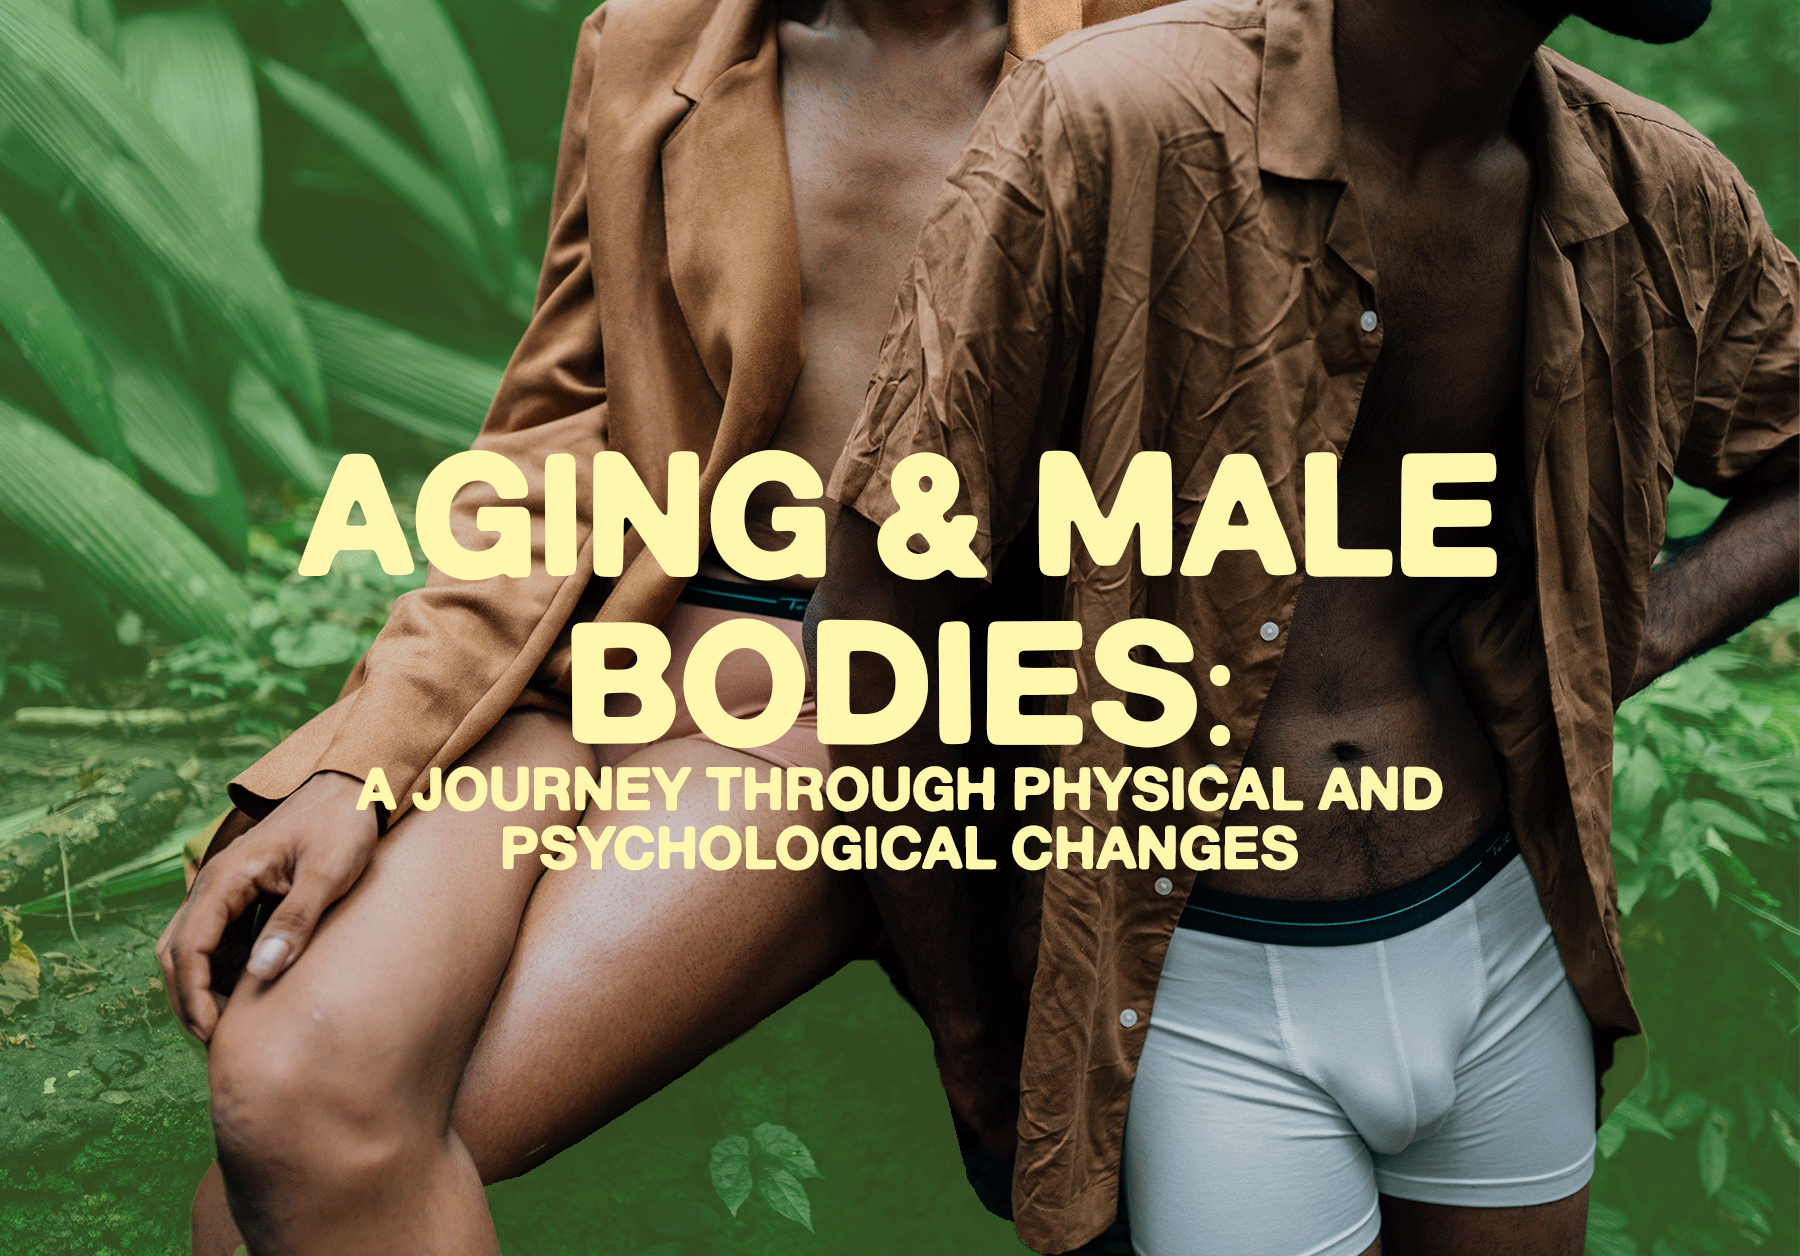 Aging & Male Bodies: A Journey through Physical and Psychological Changes